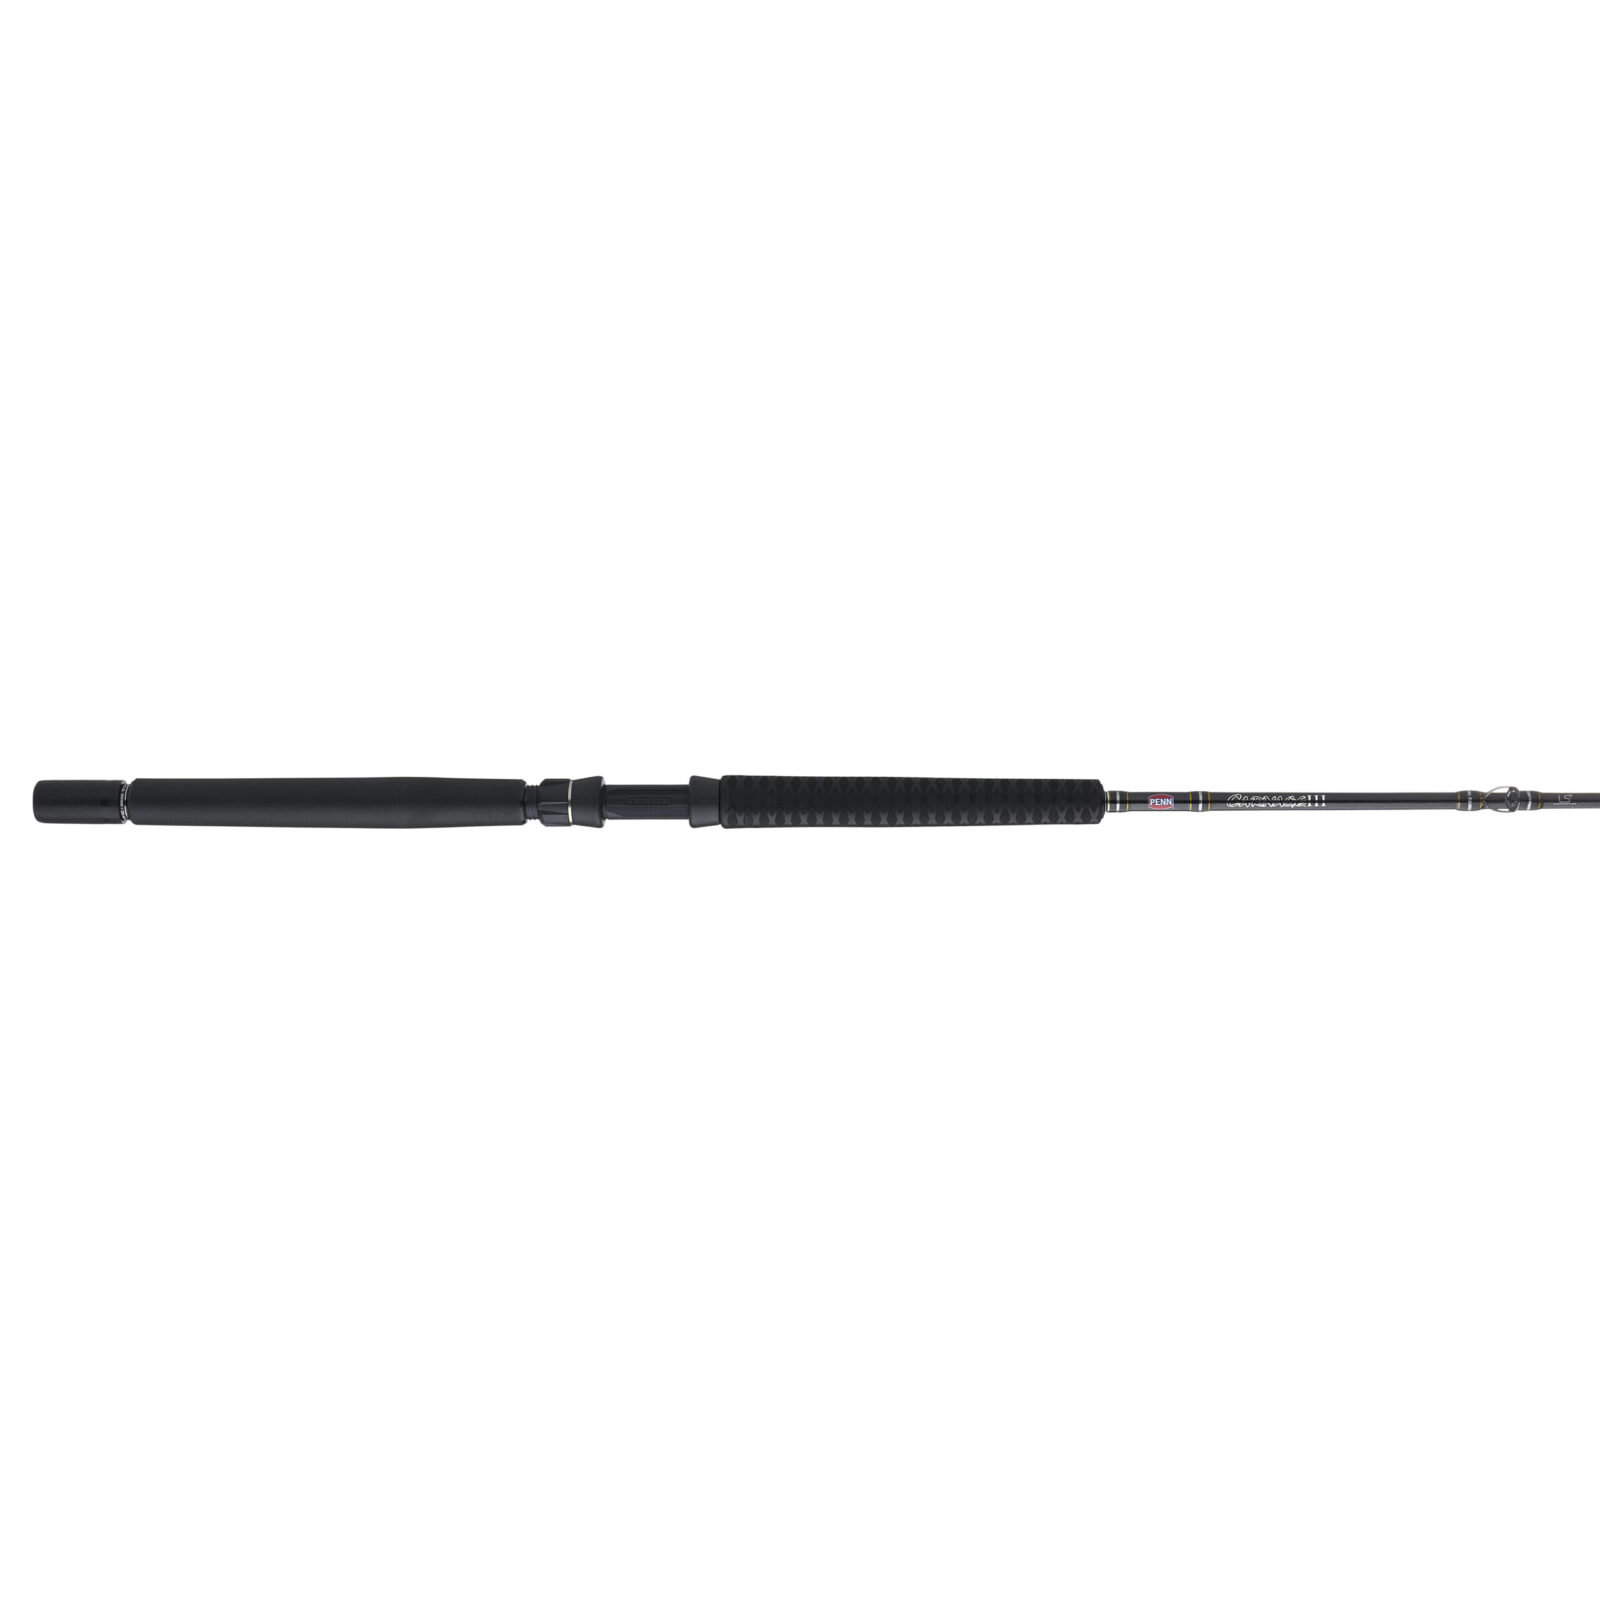 New PENN Carnage III Offshore Boat & Tournament Rods.